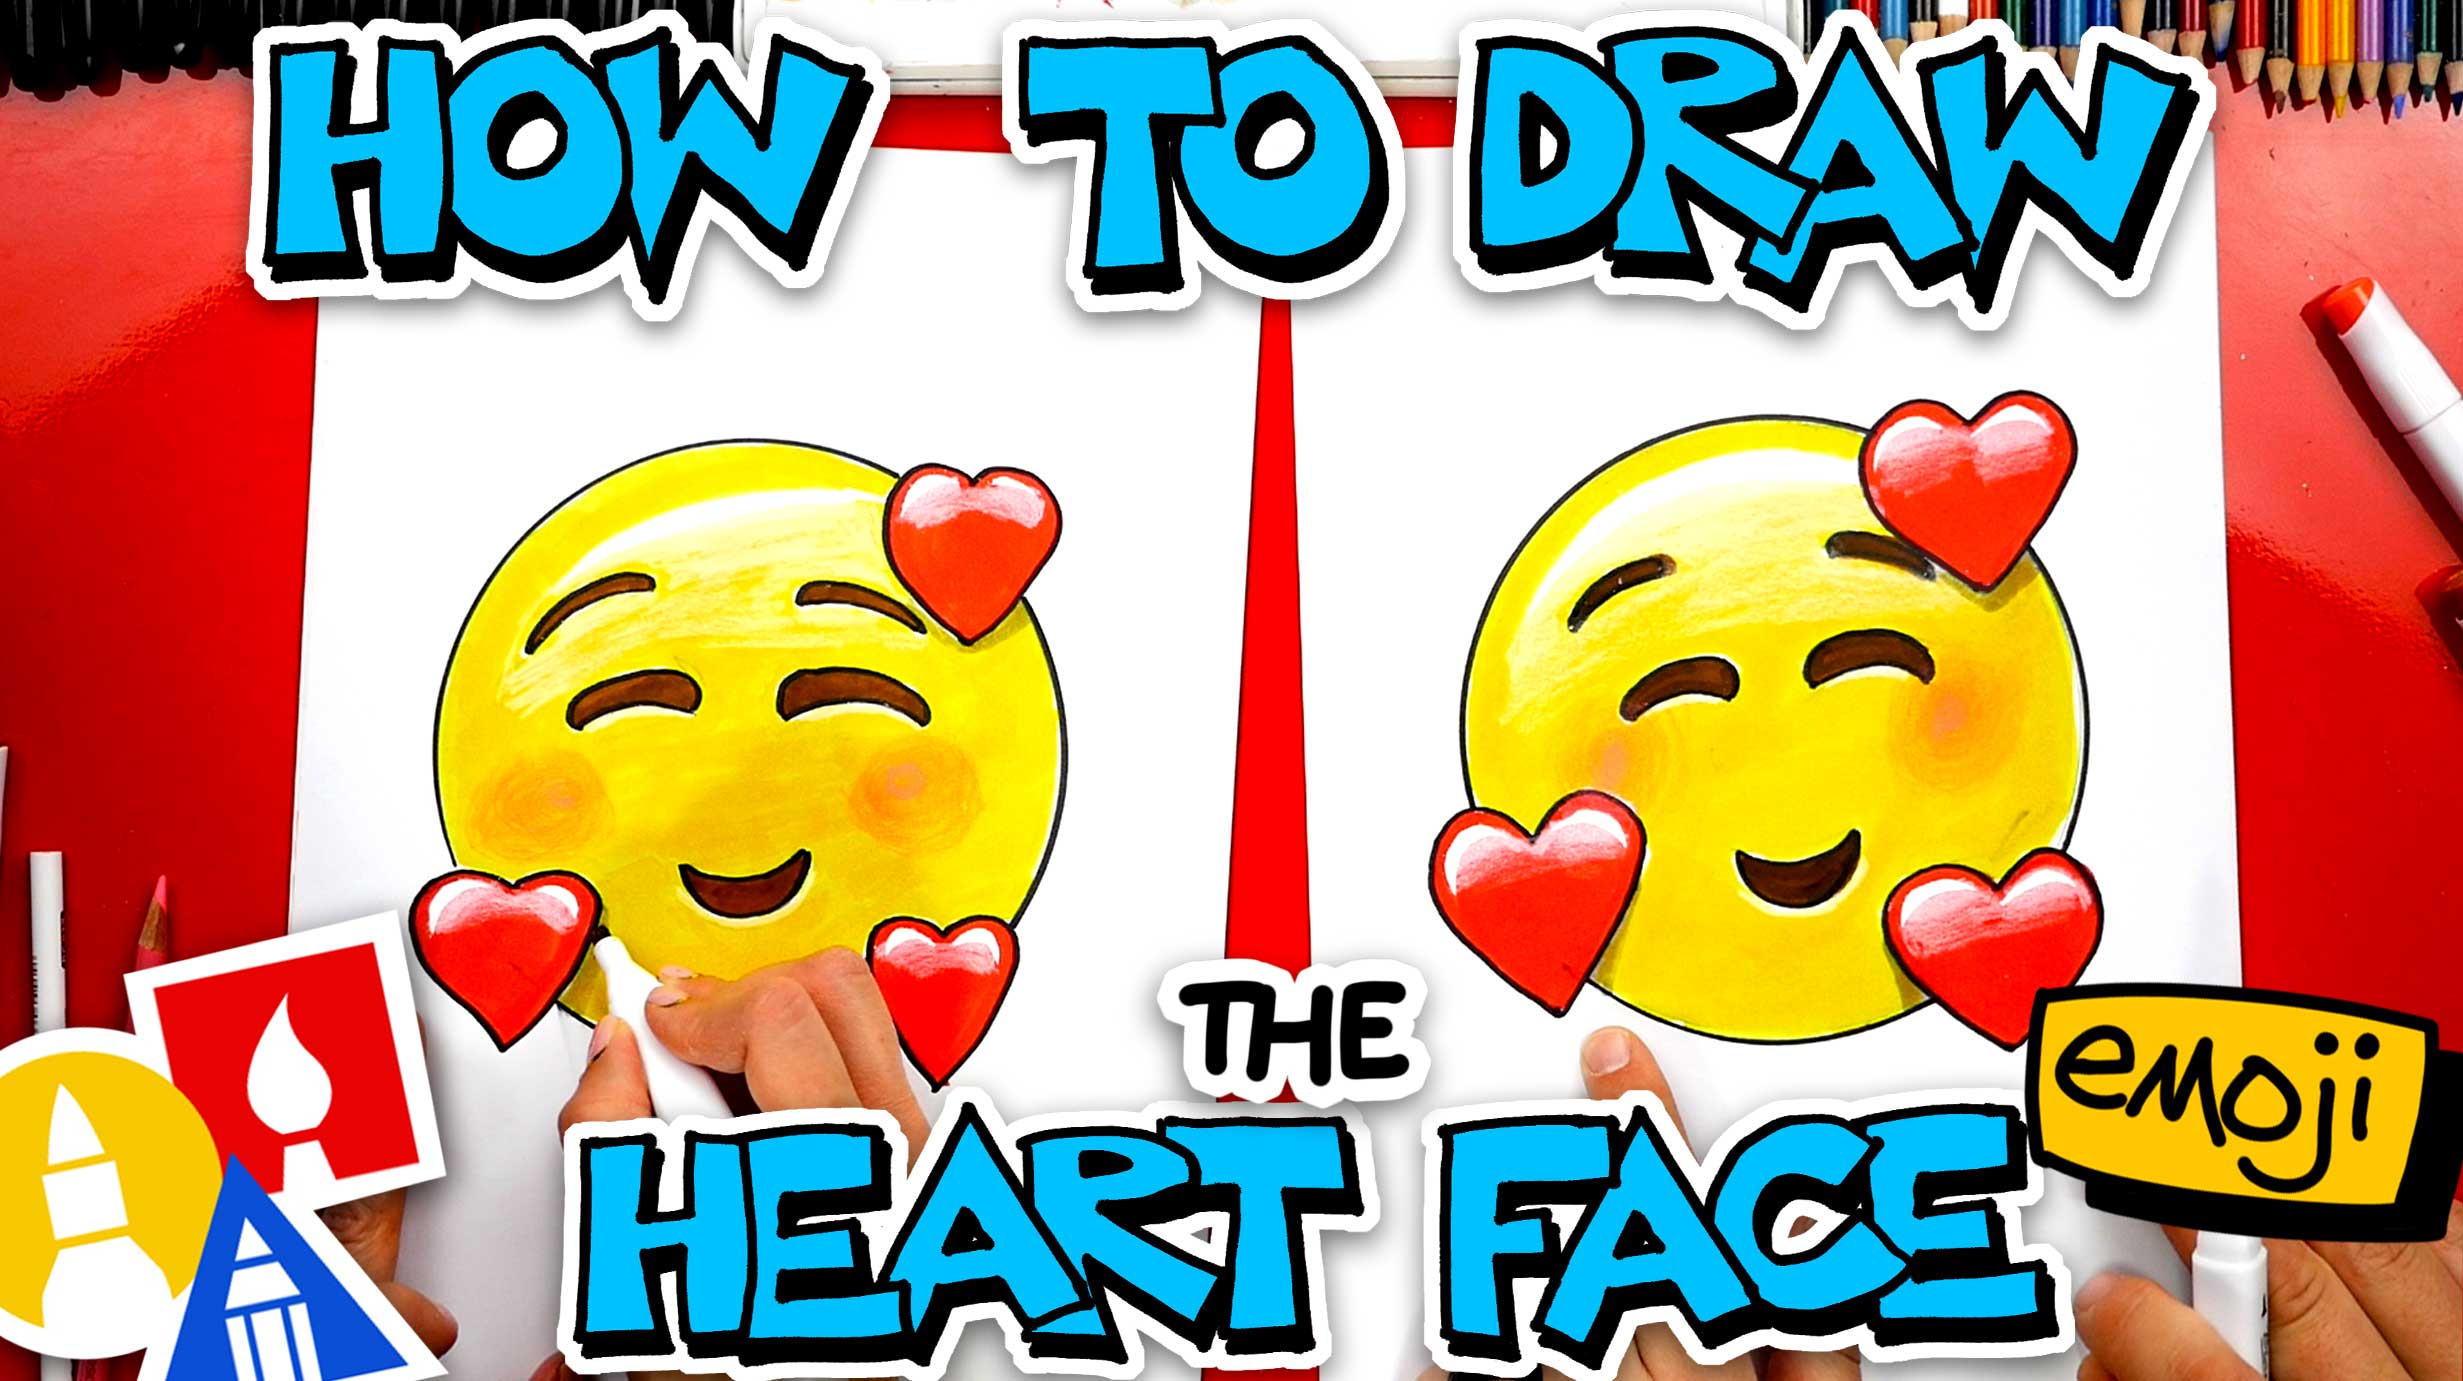 How To Draw A Crown Emoji Art For Kids Hub Art For Kids Hub Images